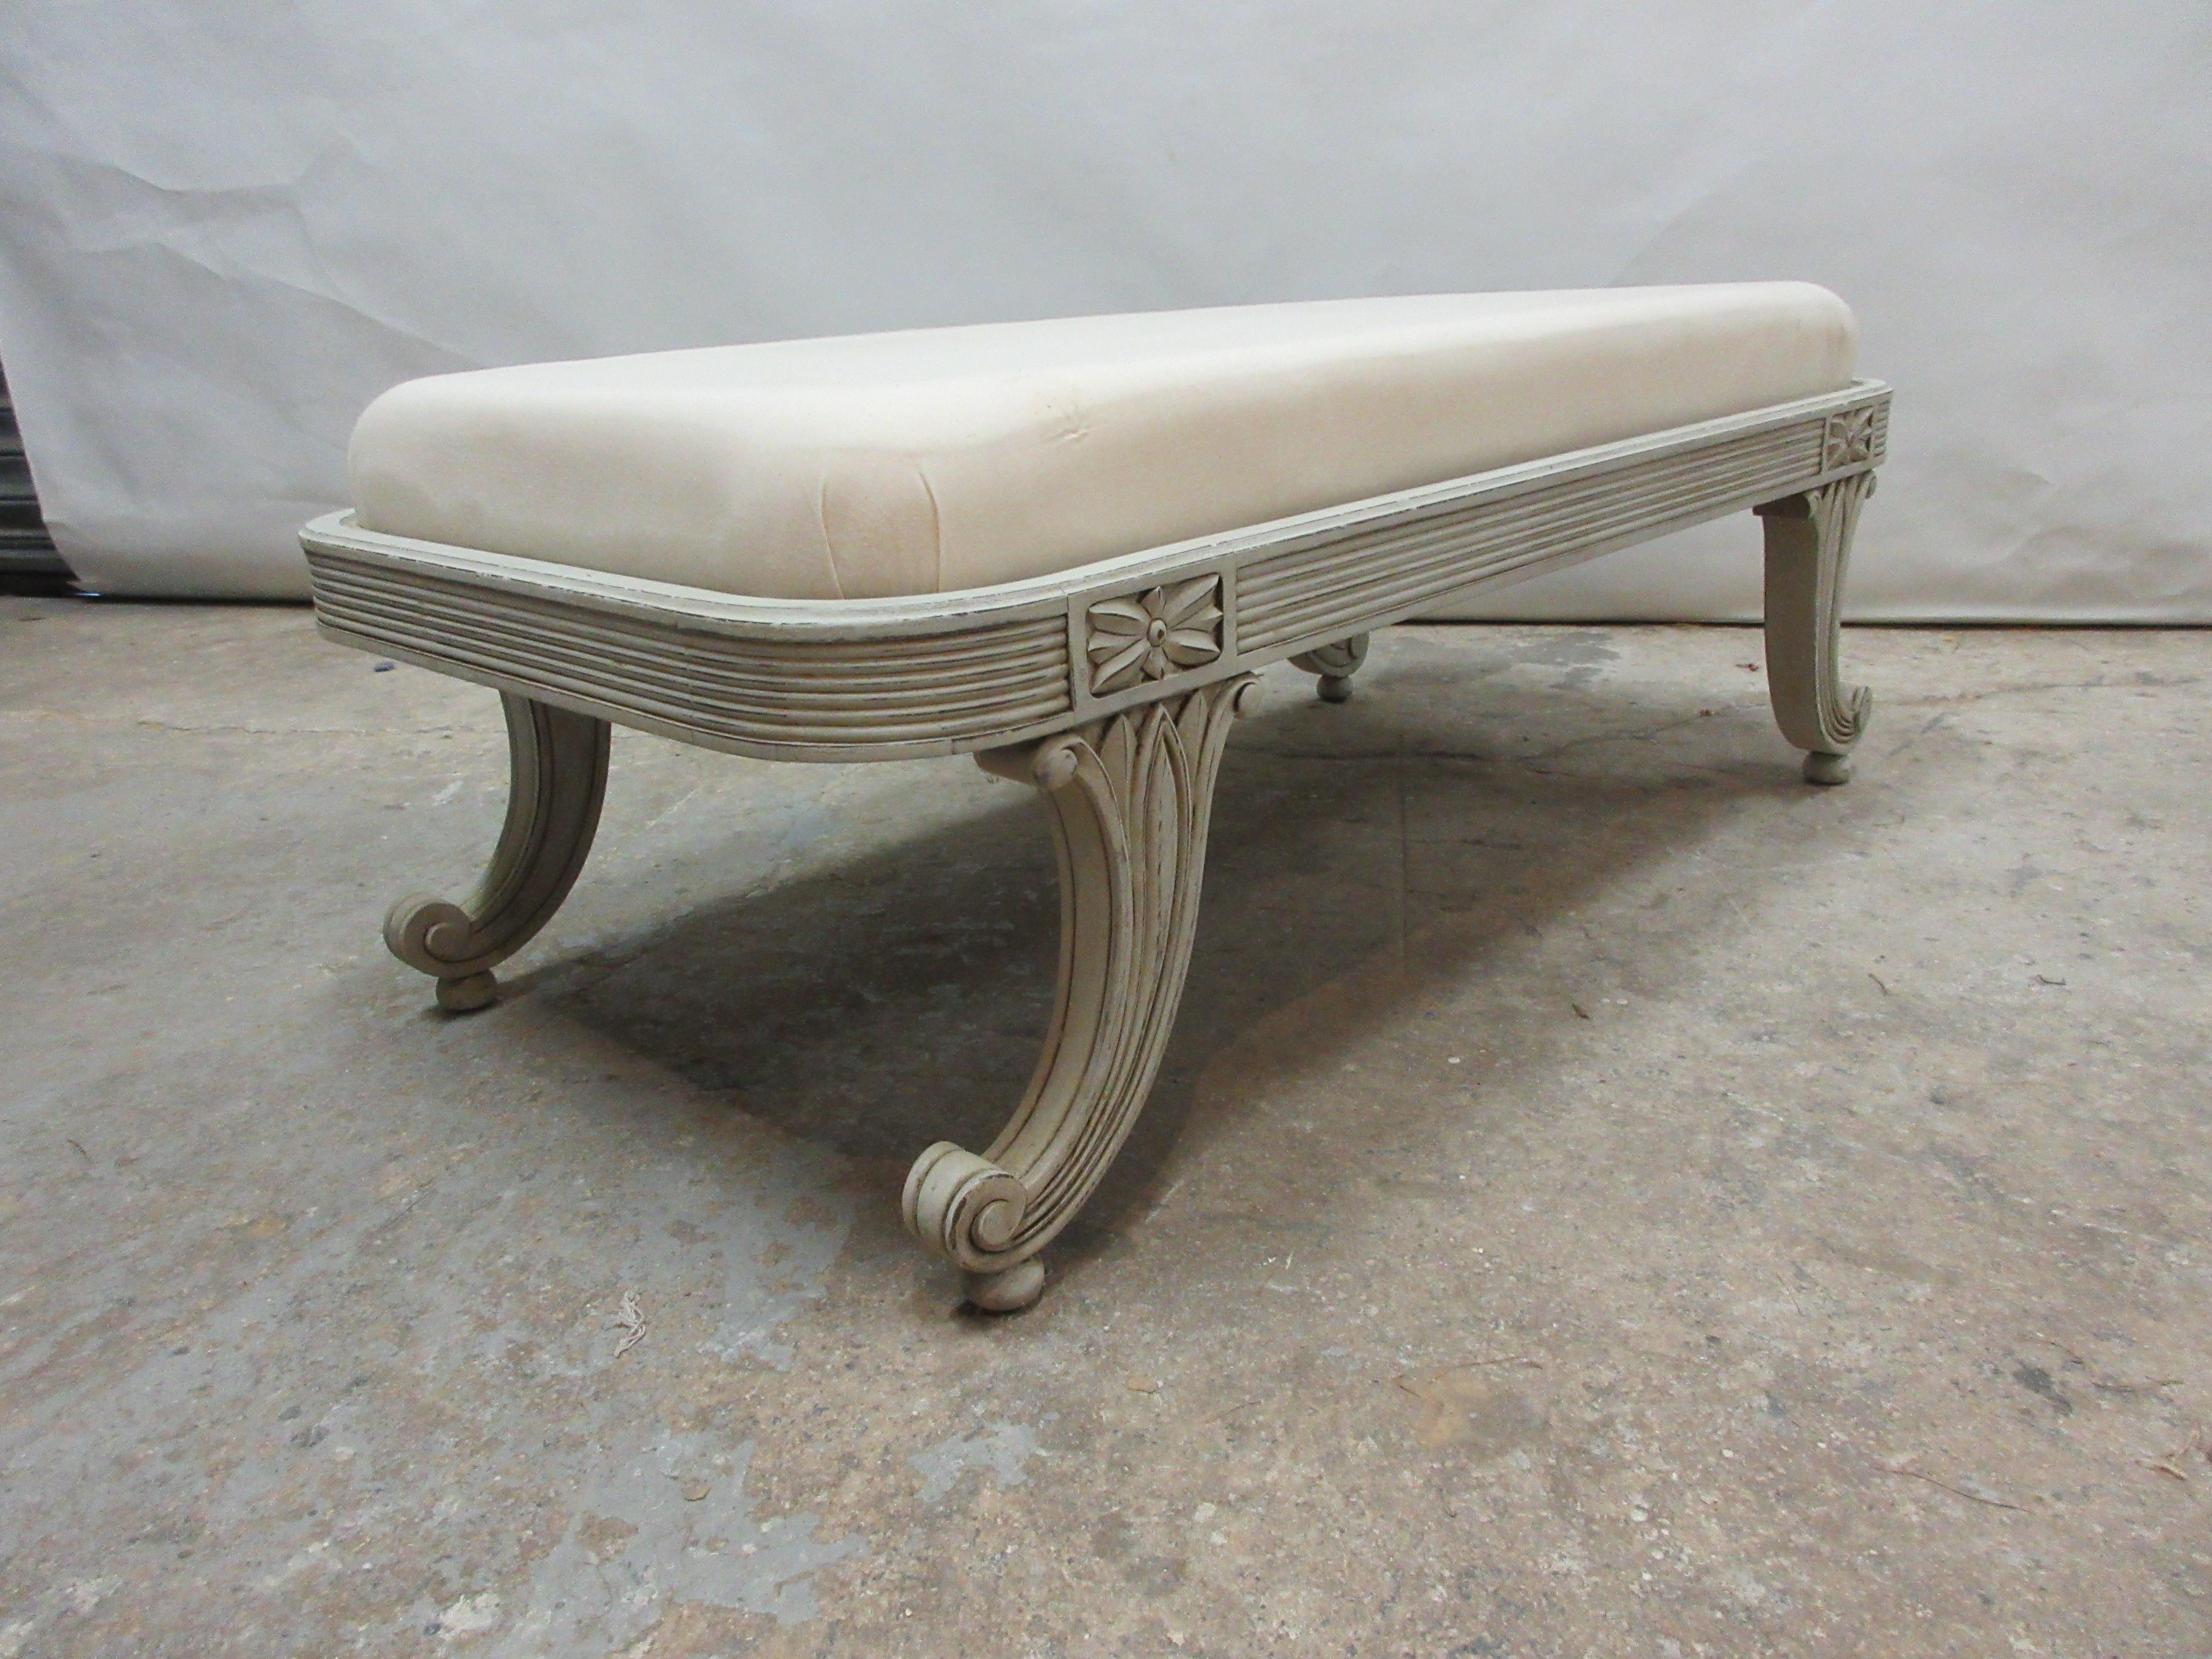 This is a Swedish Gustavian bench, it has been restored and repainted with milk paints 